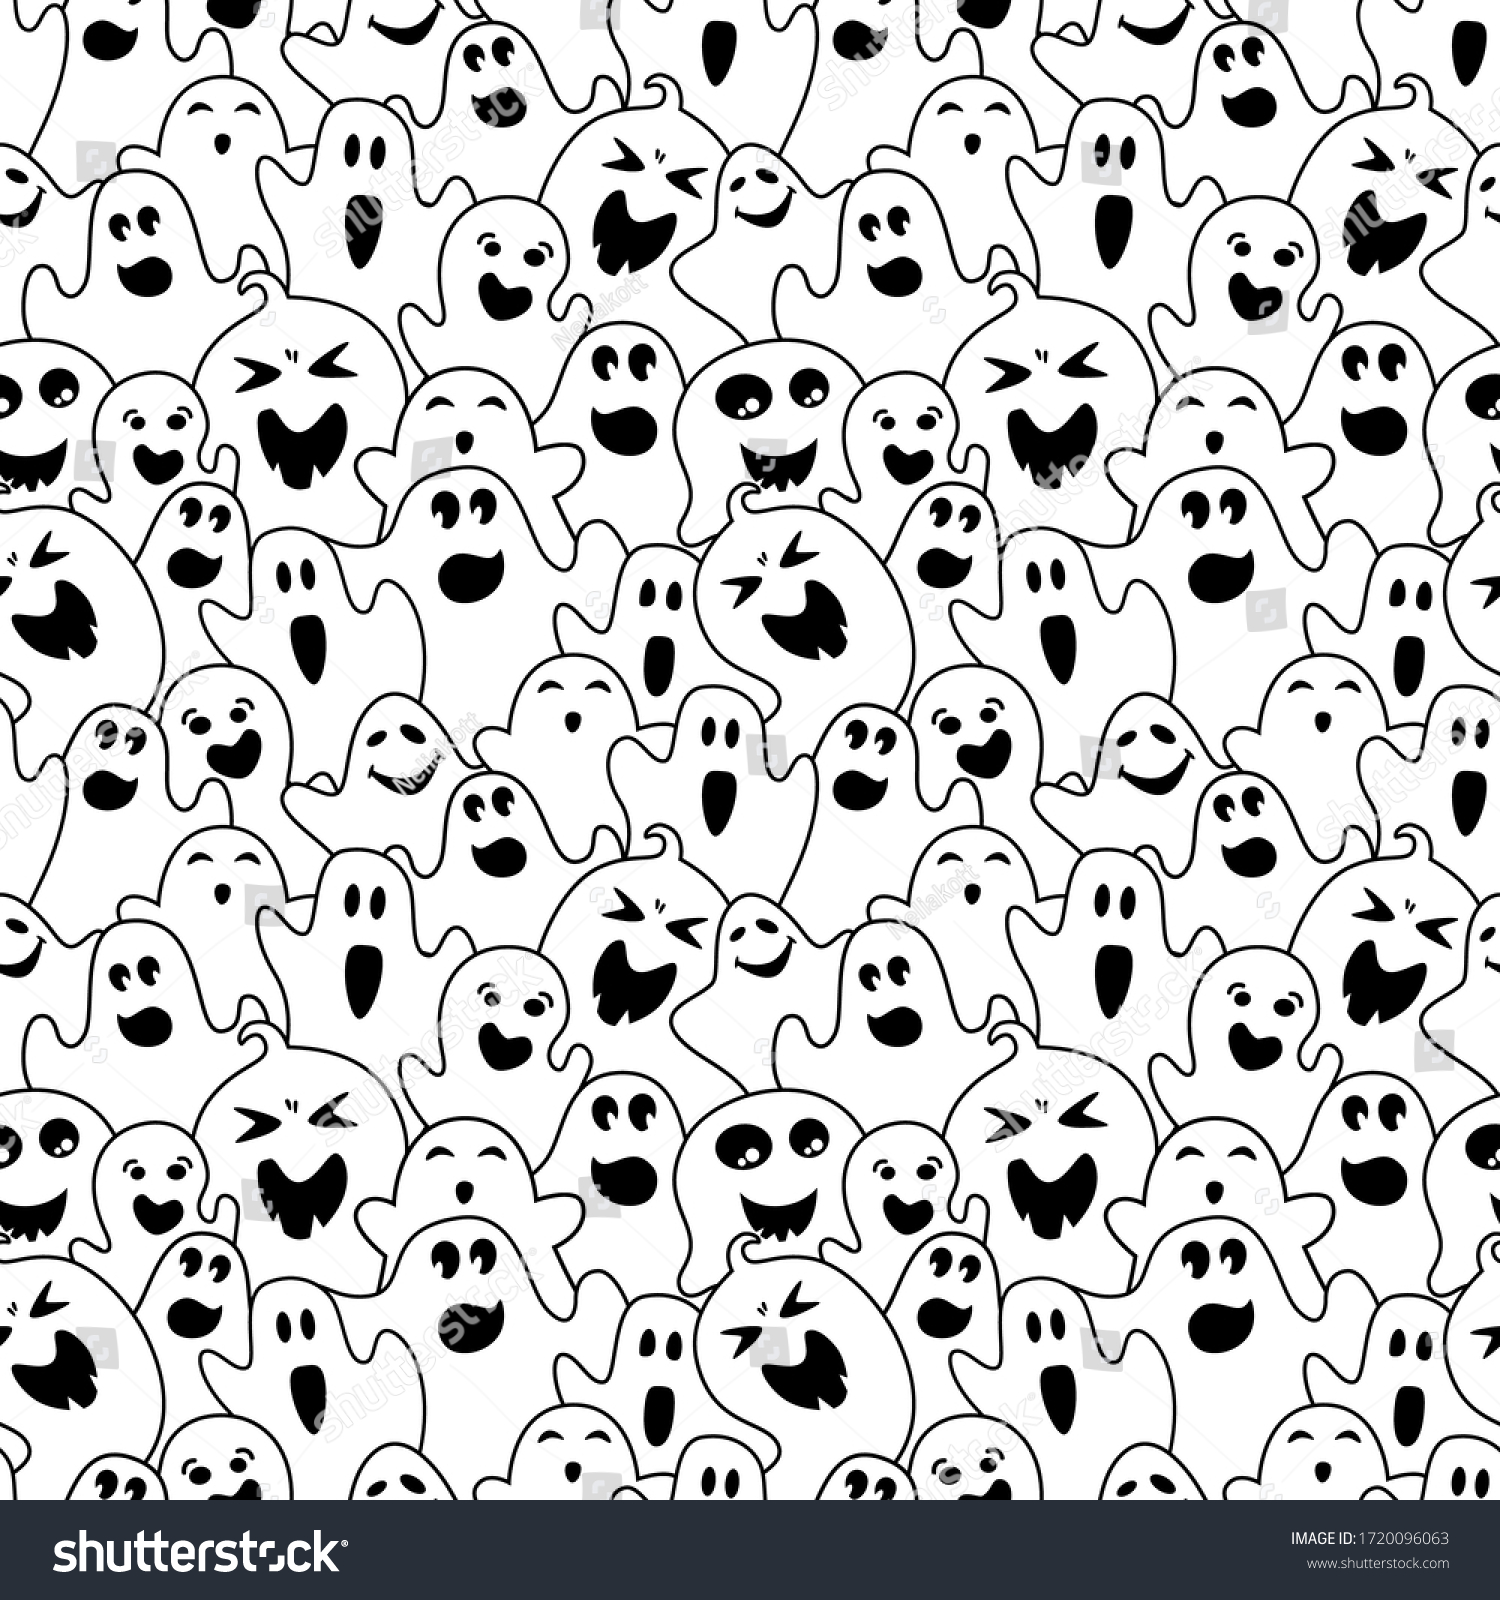 Ghost Flat Black Line Seamless Pattern Stock Vector (Royalty Free ...